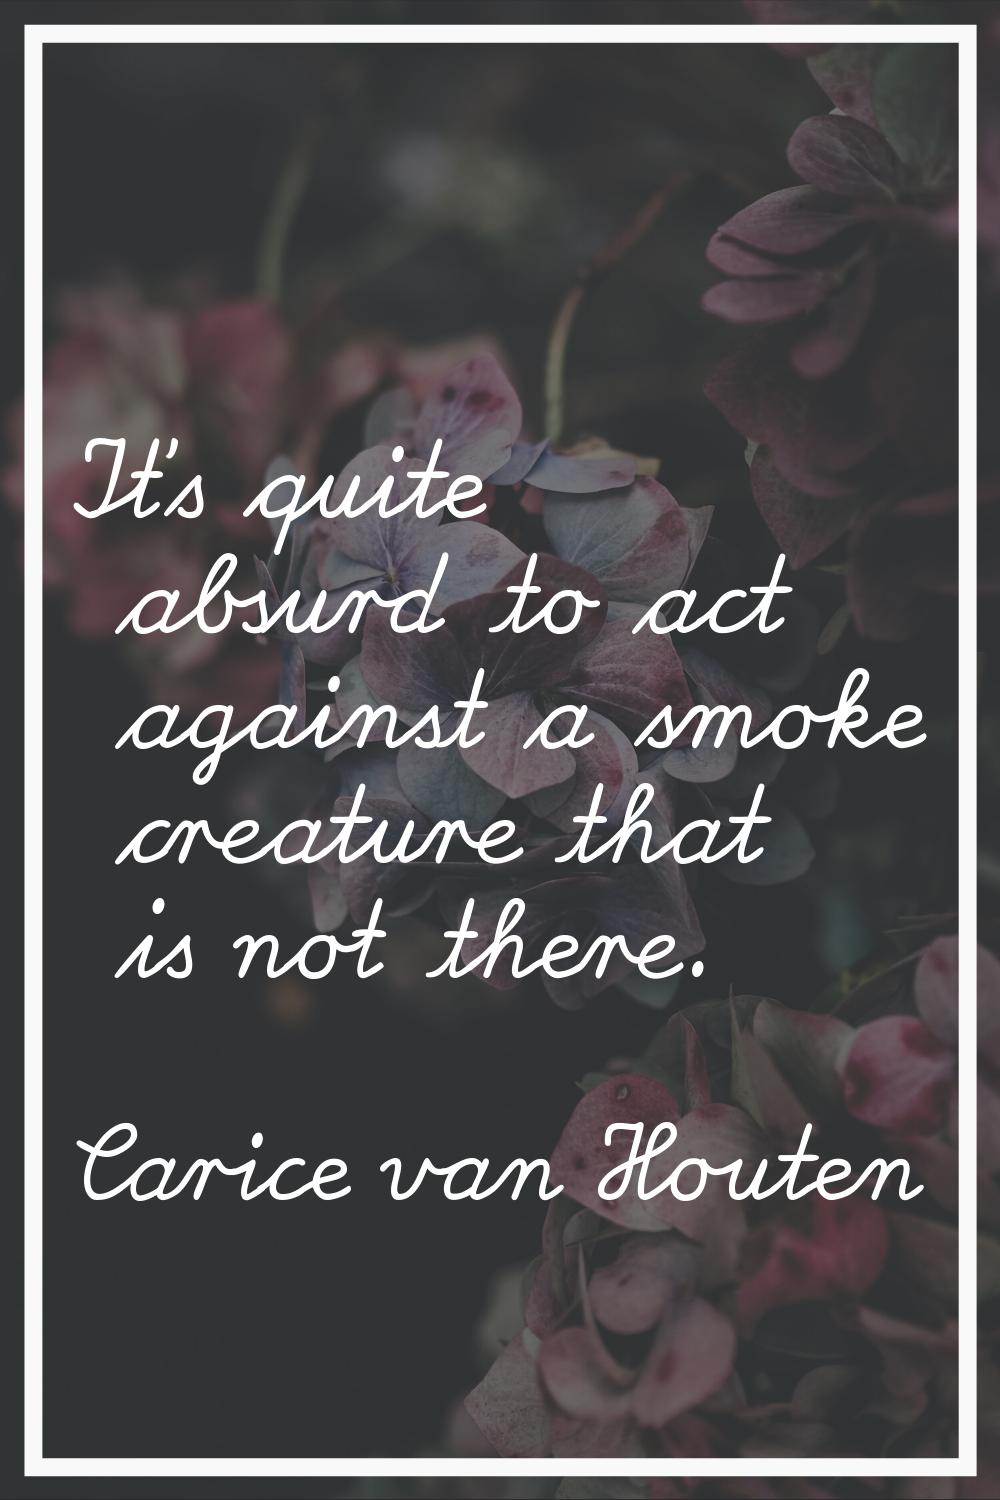 It's quite absurd to act against a smoke creature that is not there.